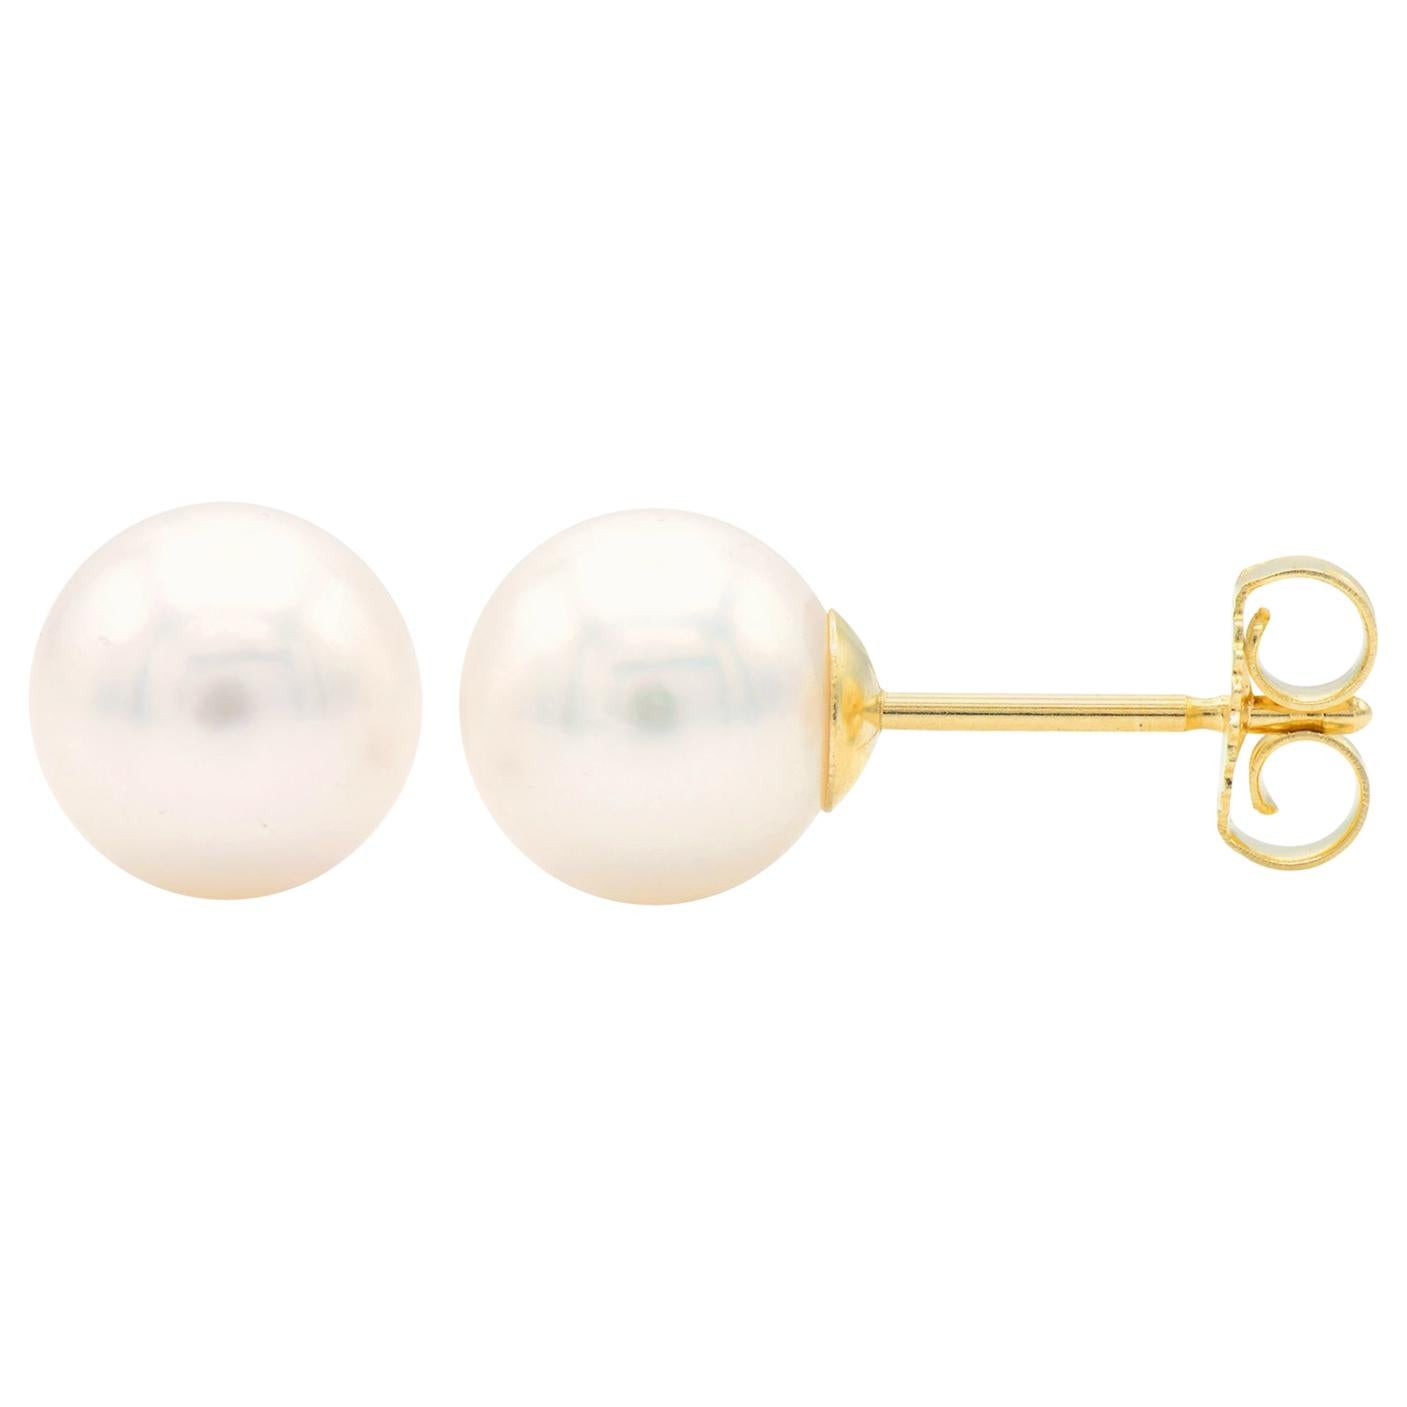 Cultured Pearl Stud Earrings 6MM with 14 Karat Yellow Gold Posts and Backs For Sale